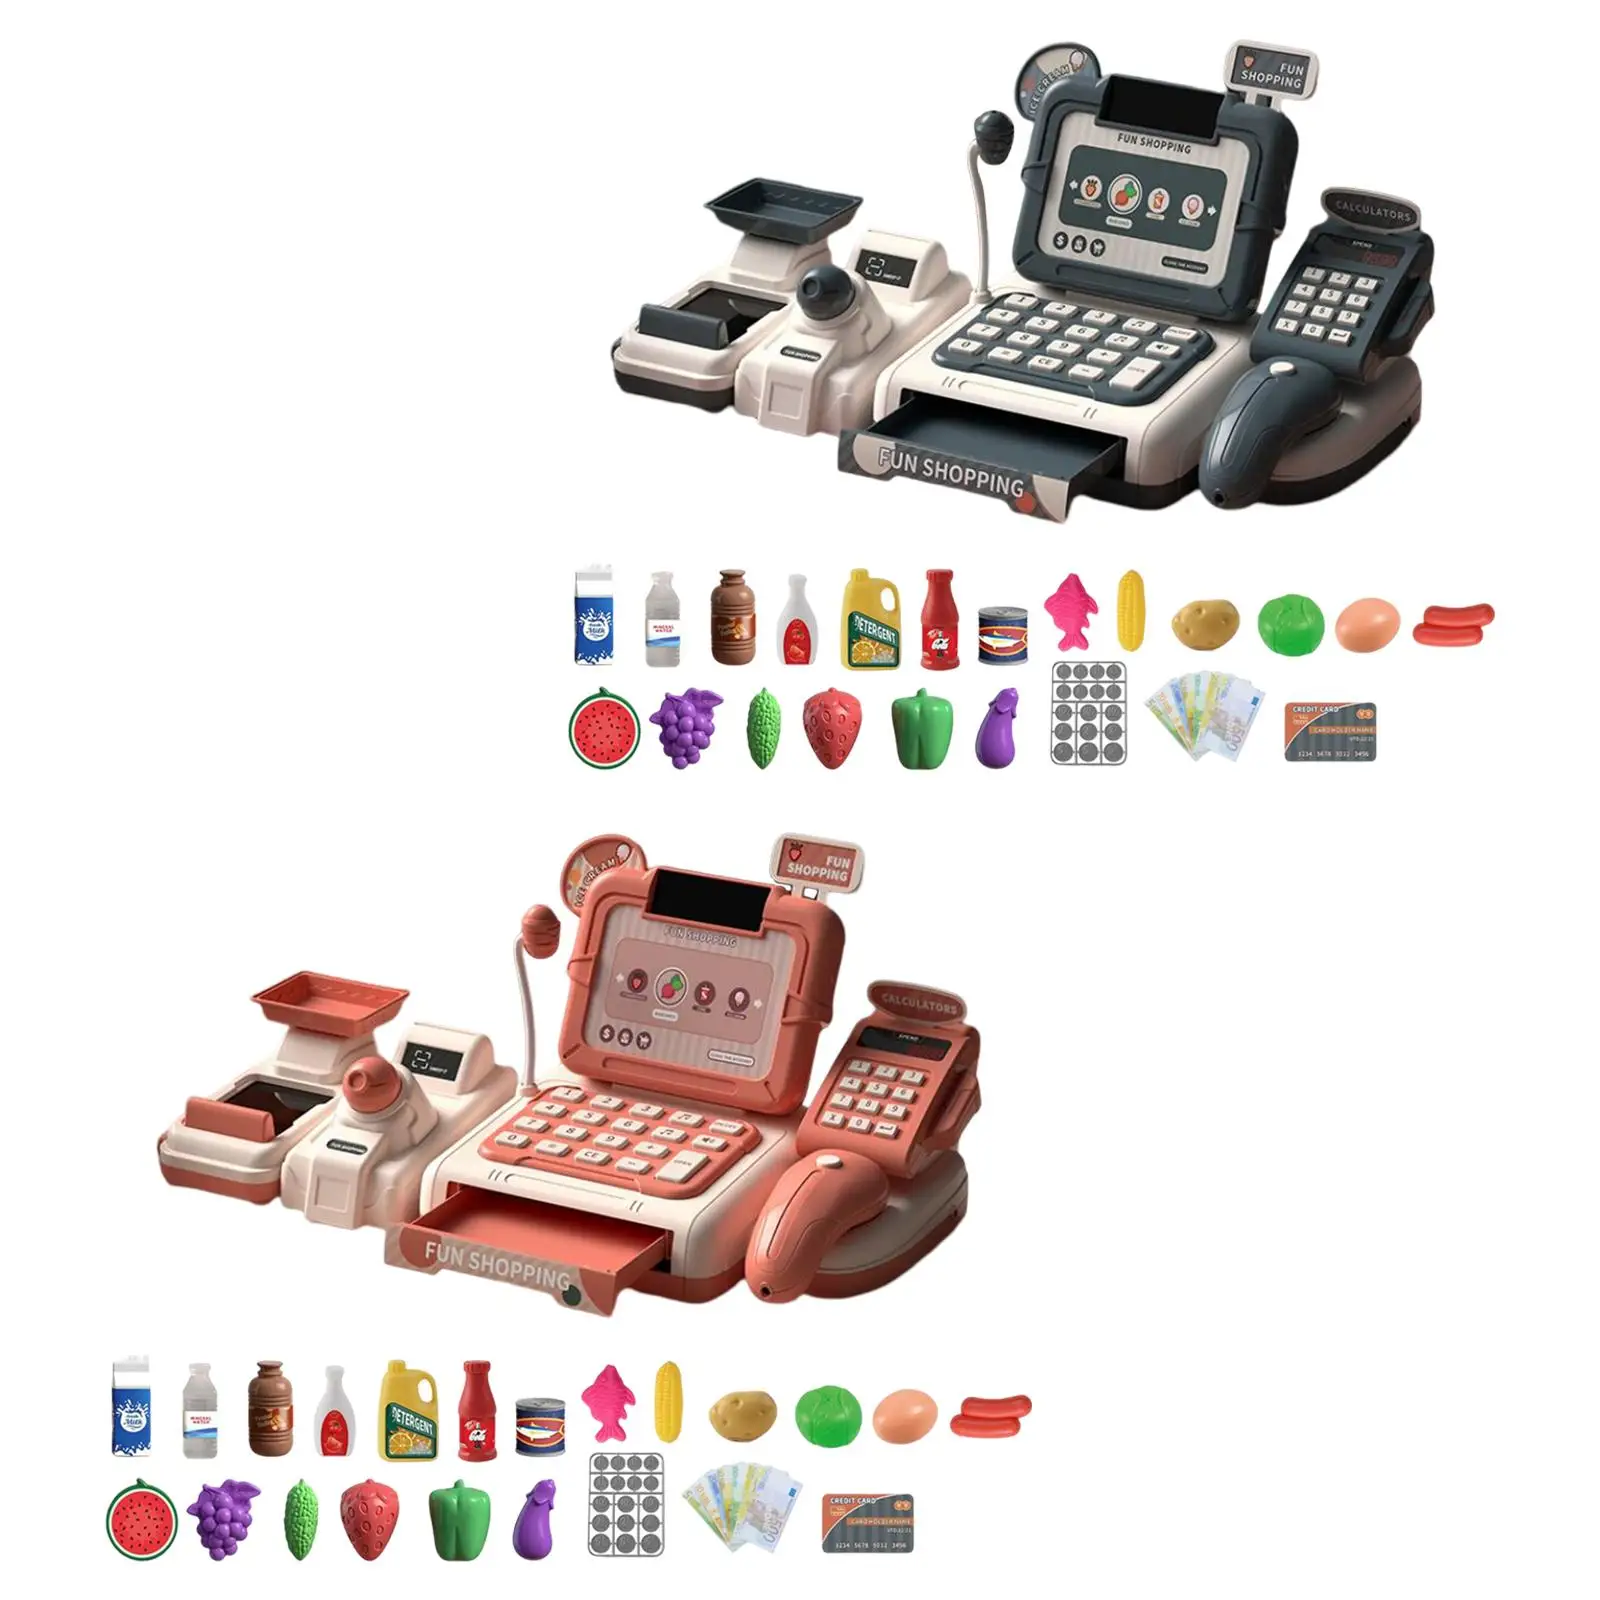 Store Cashier Toys Grocery Store Pretend Play Store Shopping Playset Cash Register Cash Register Toy for Girls Kids Party Favor